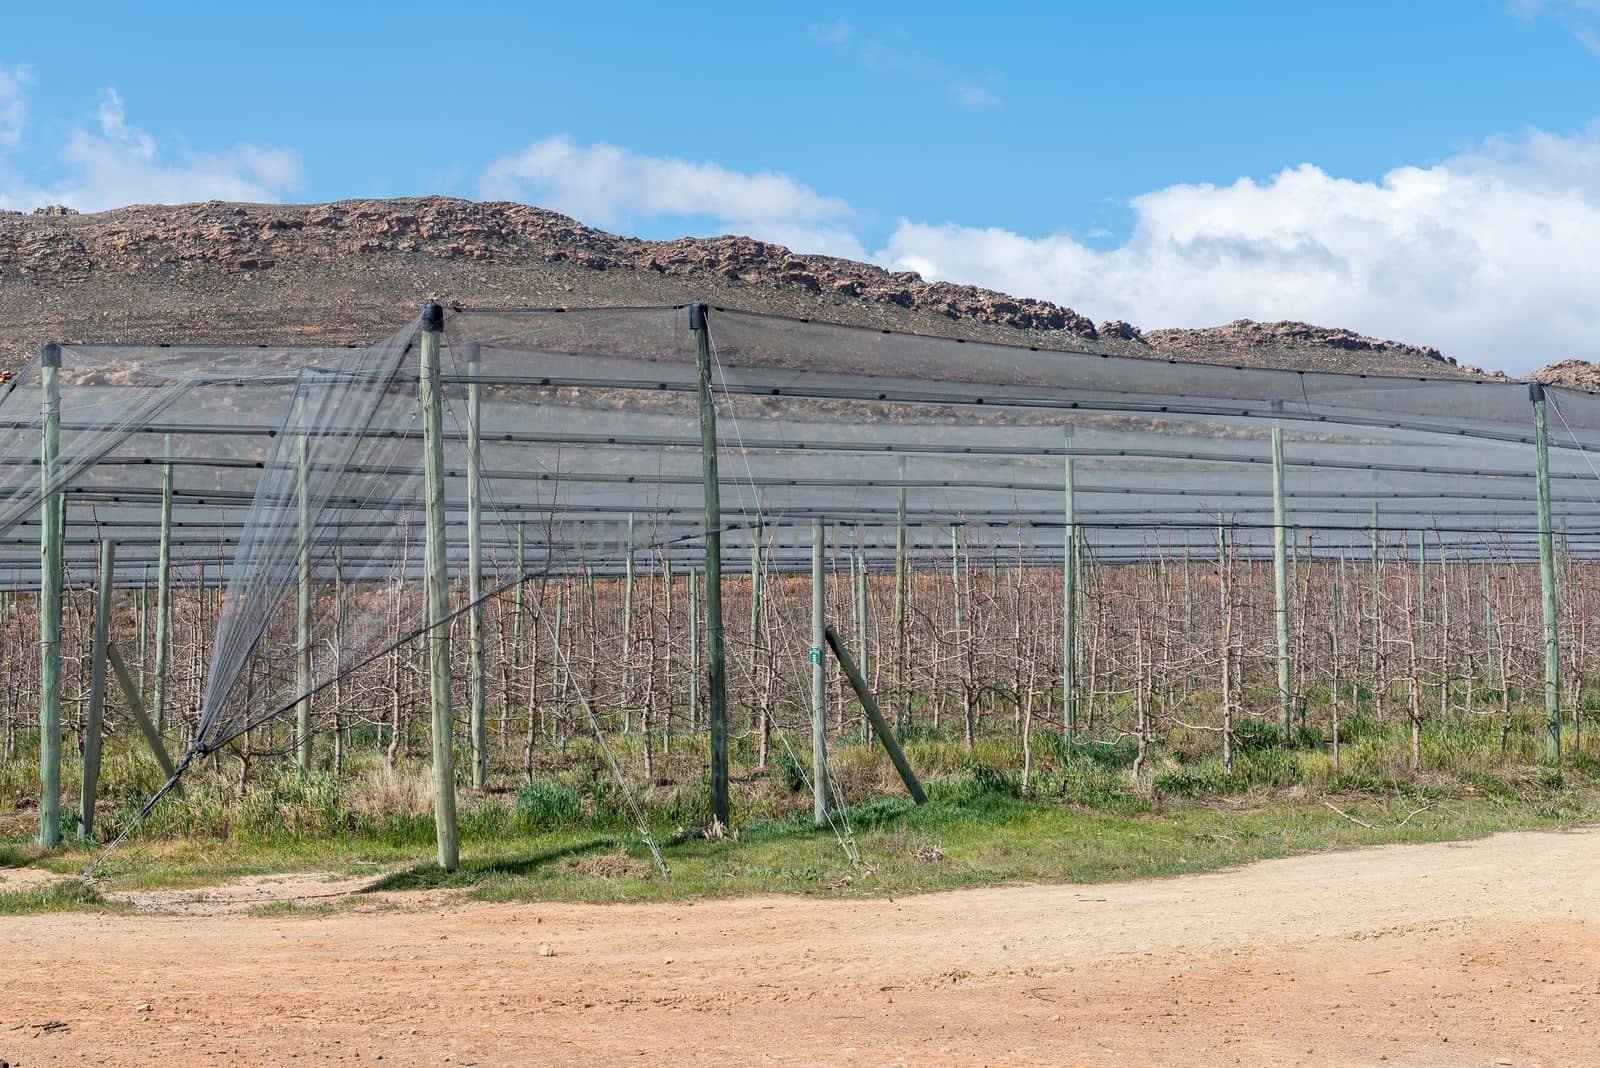 Fruit tree orchard under hail nettin on the Katbakkies road in the Western Cape Cederberg. The espalier system is used. 